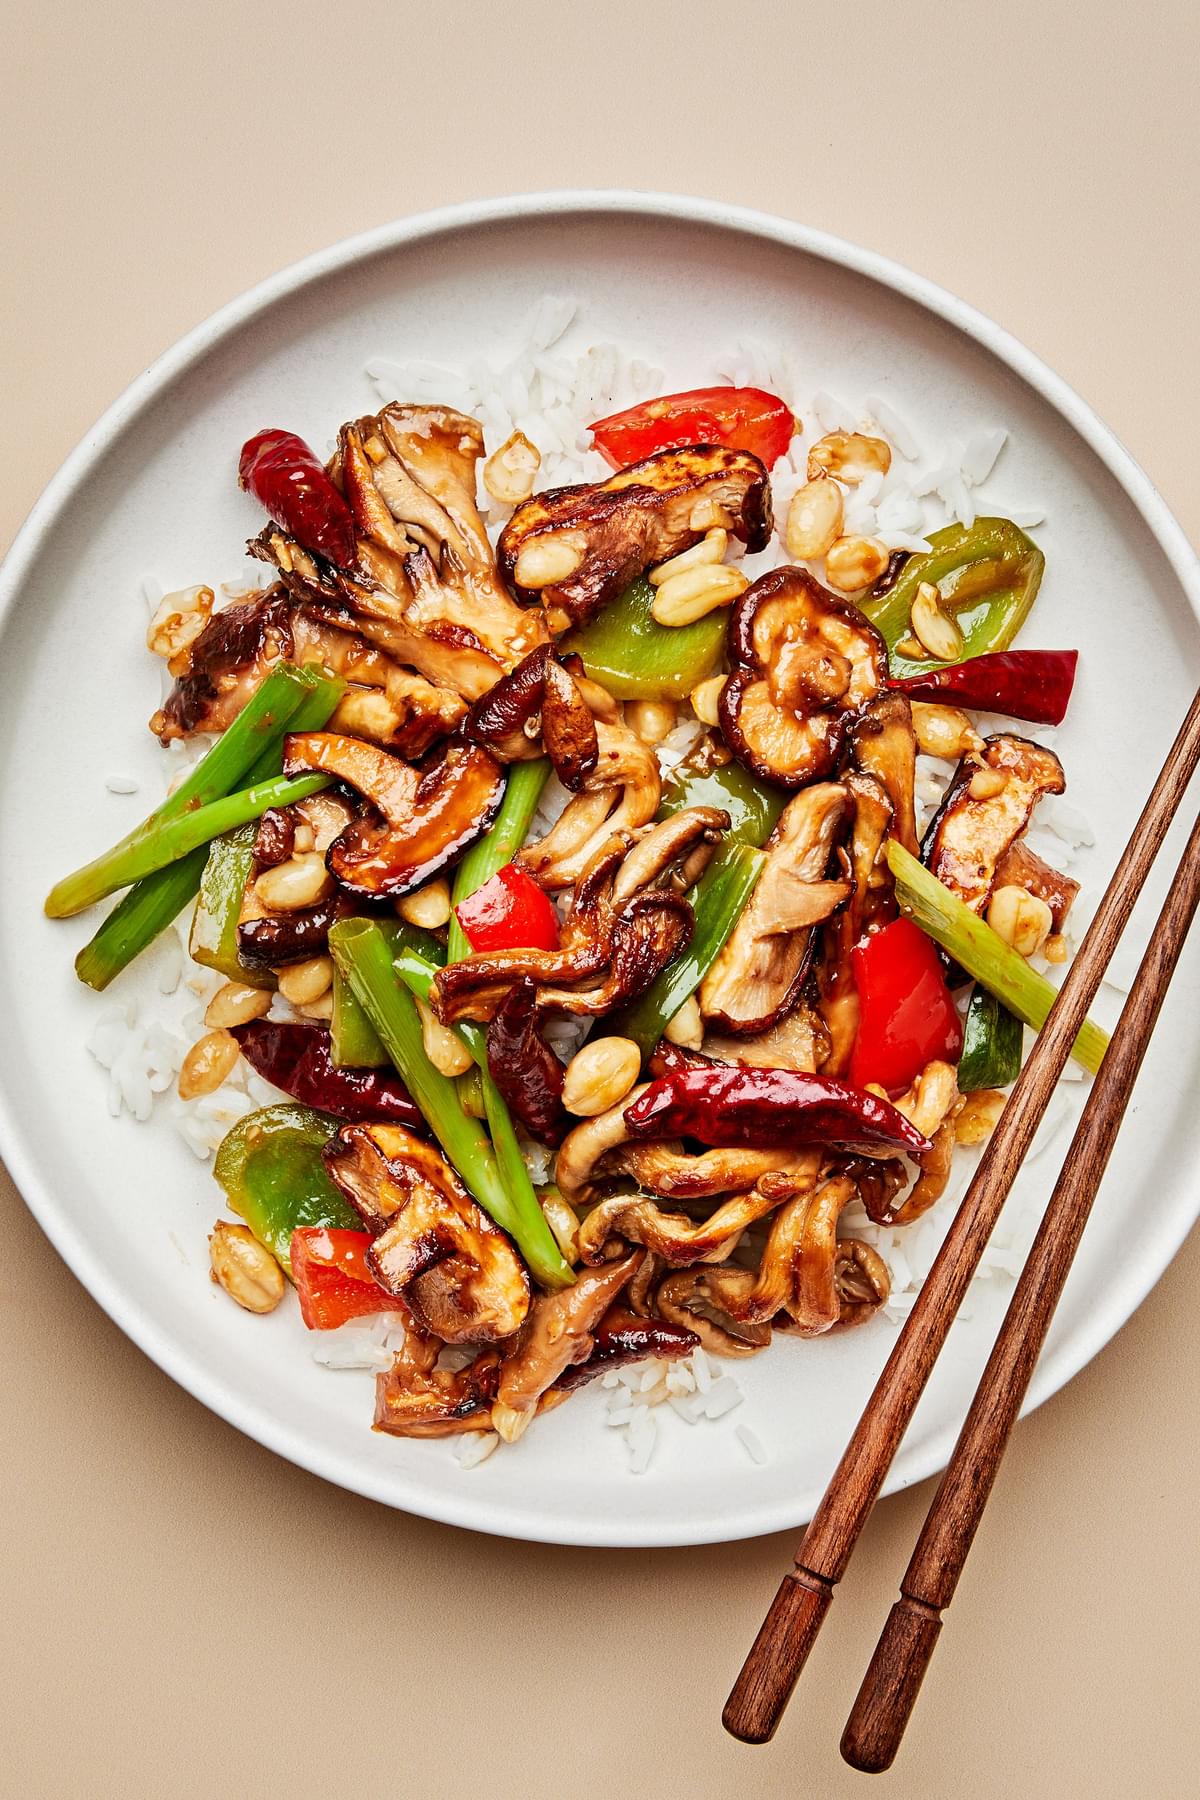 kung pao mushrooms served on top of white rice on a plate with chopsticks